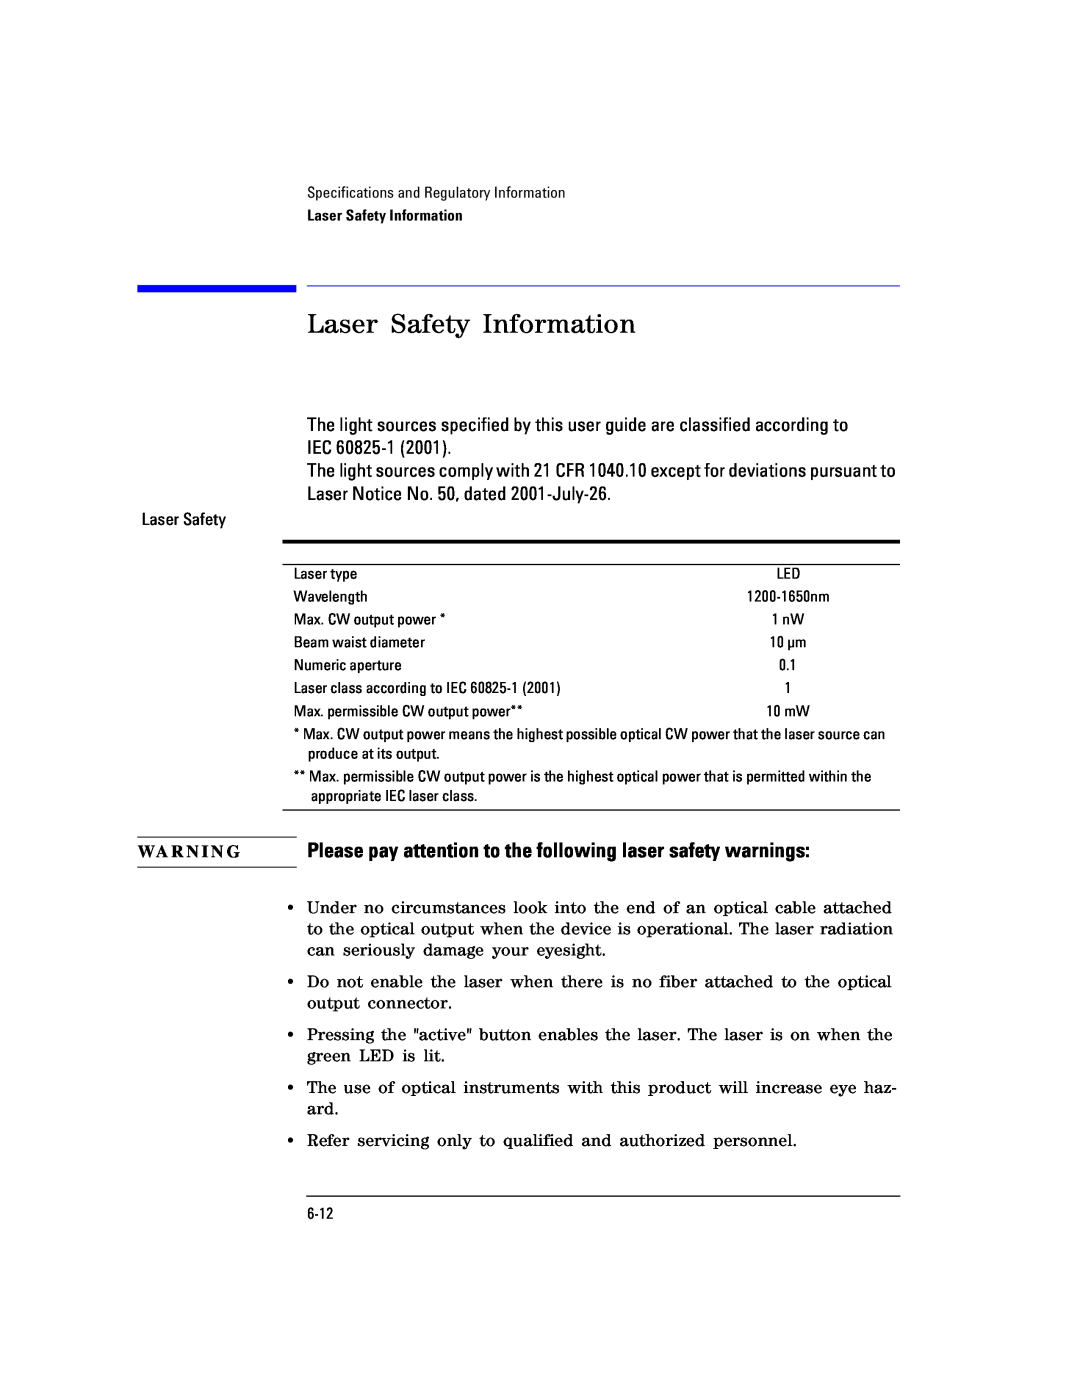 Agilent Technologies Agilent 86120C Laser Safety Information, Please pay attention to the following laser safety warnings 